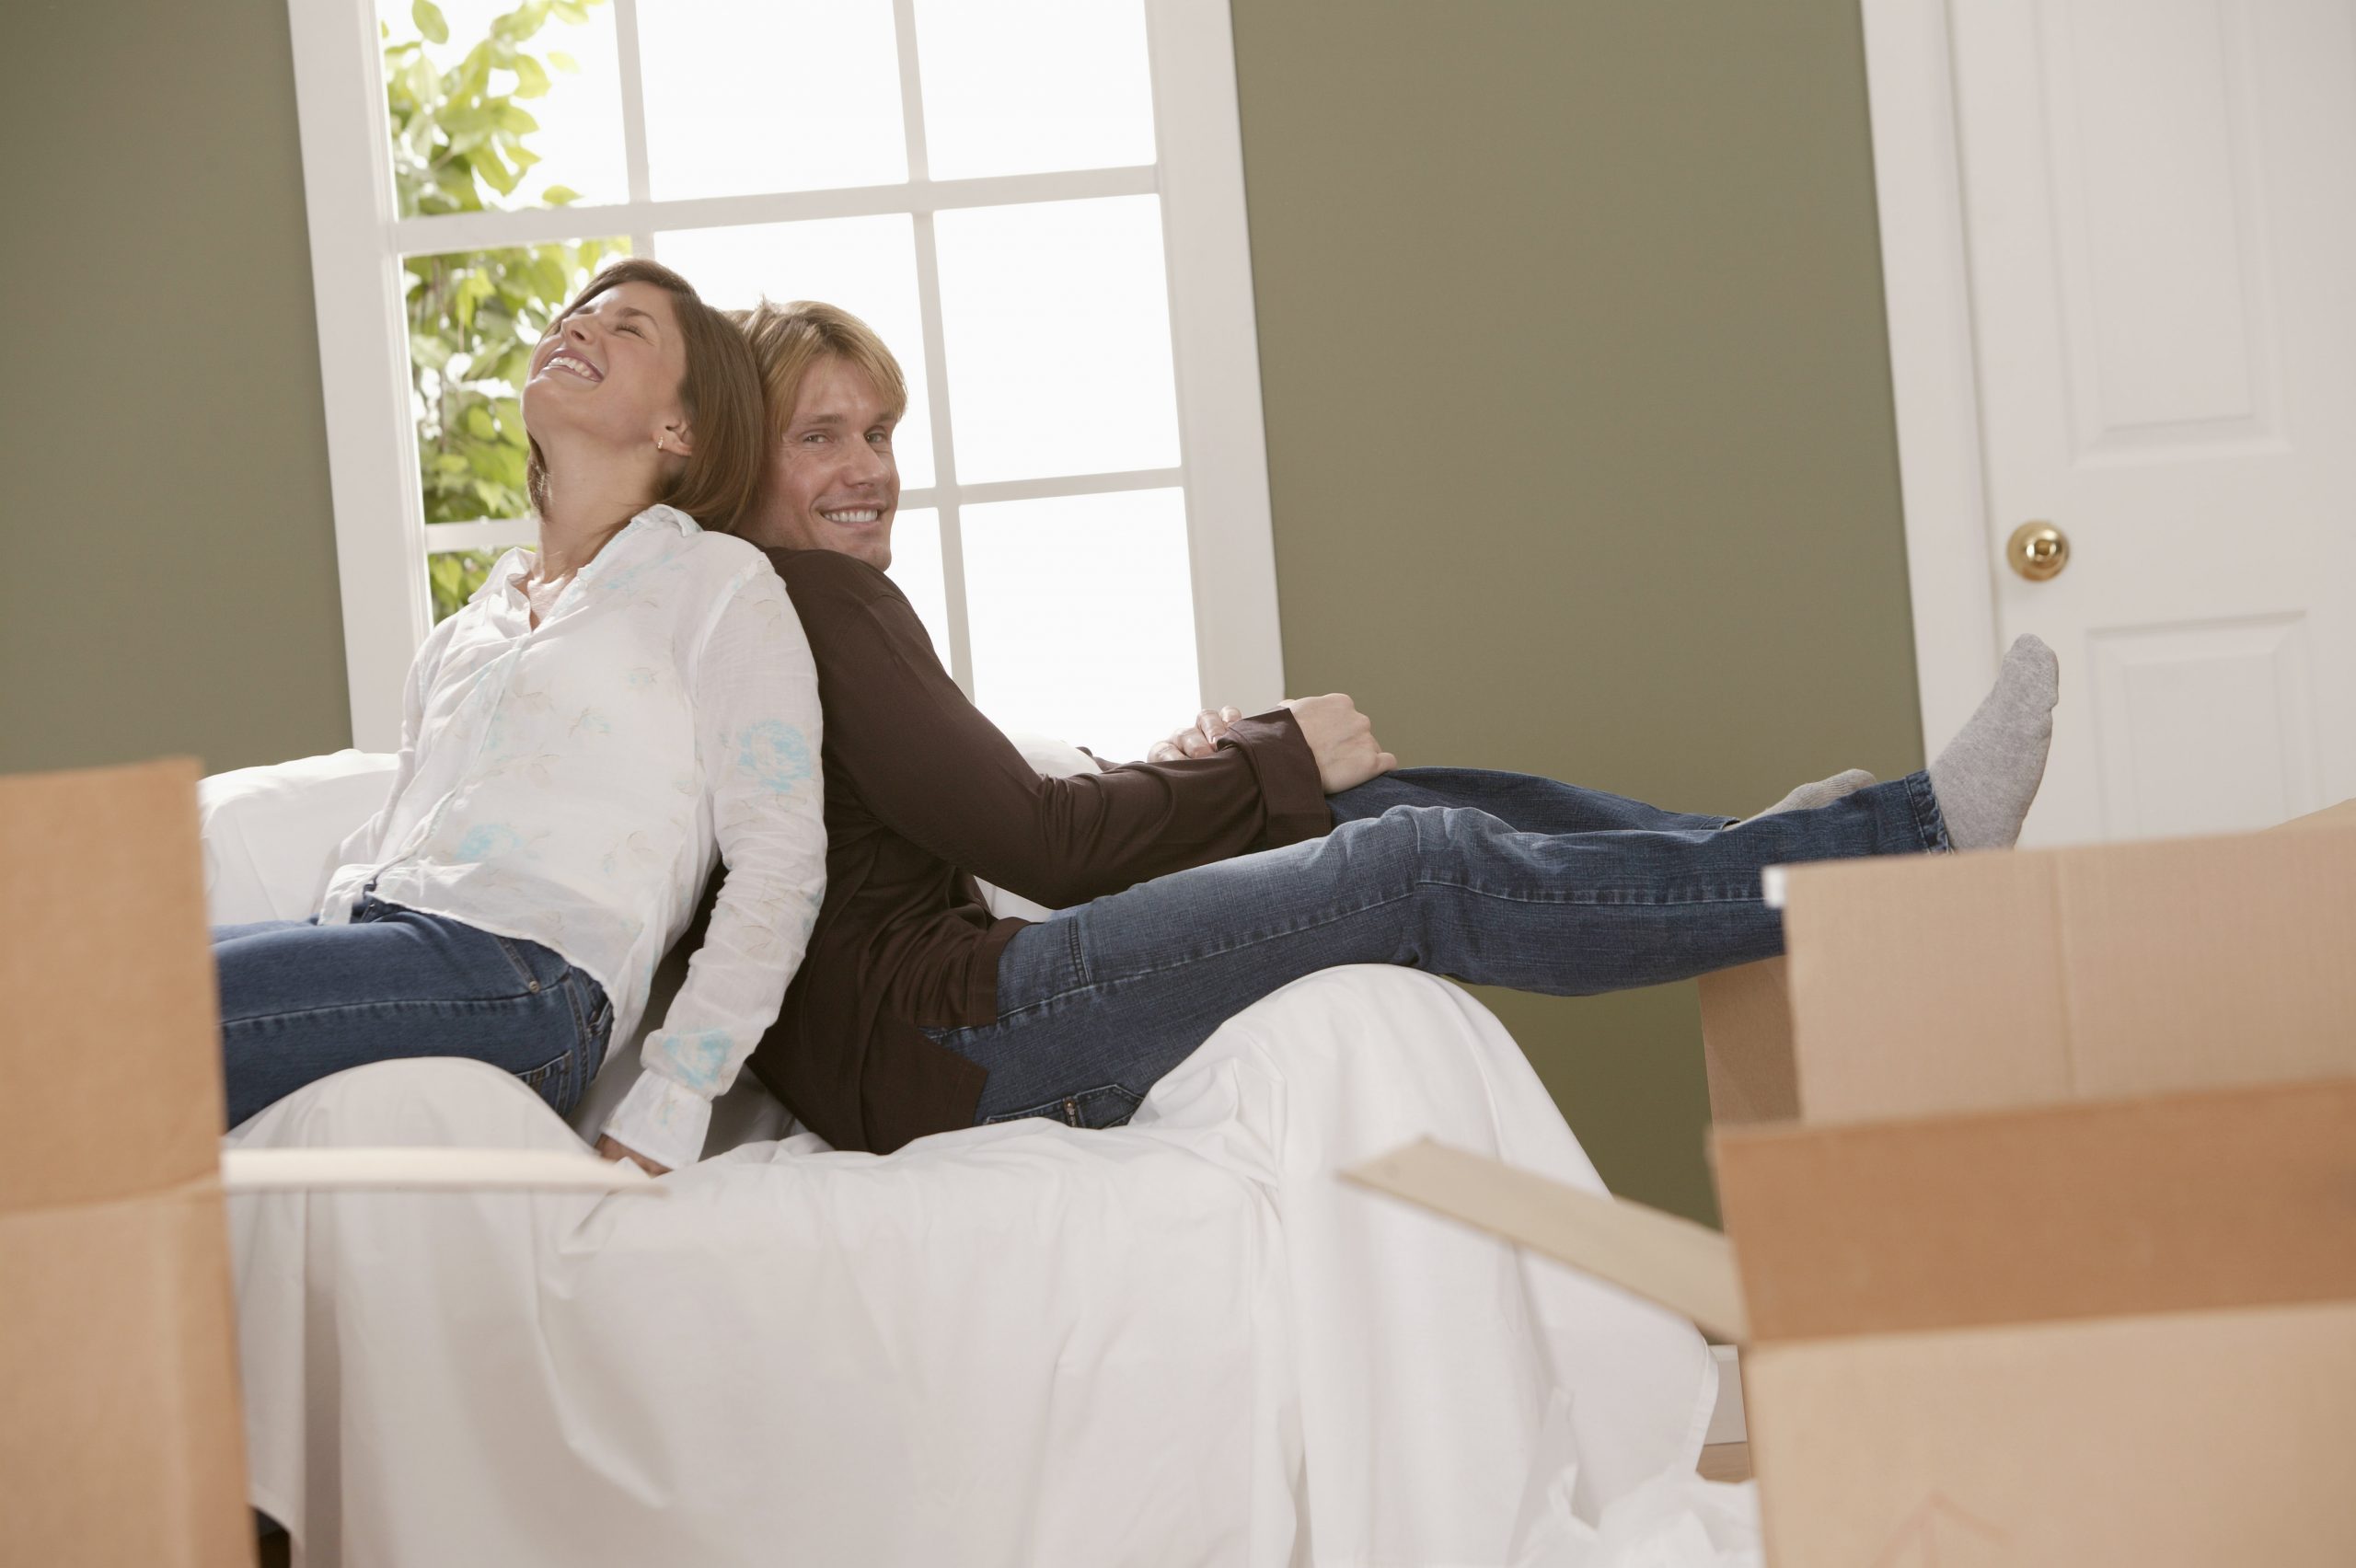 How can full service movers make a moving process much smoother?